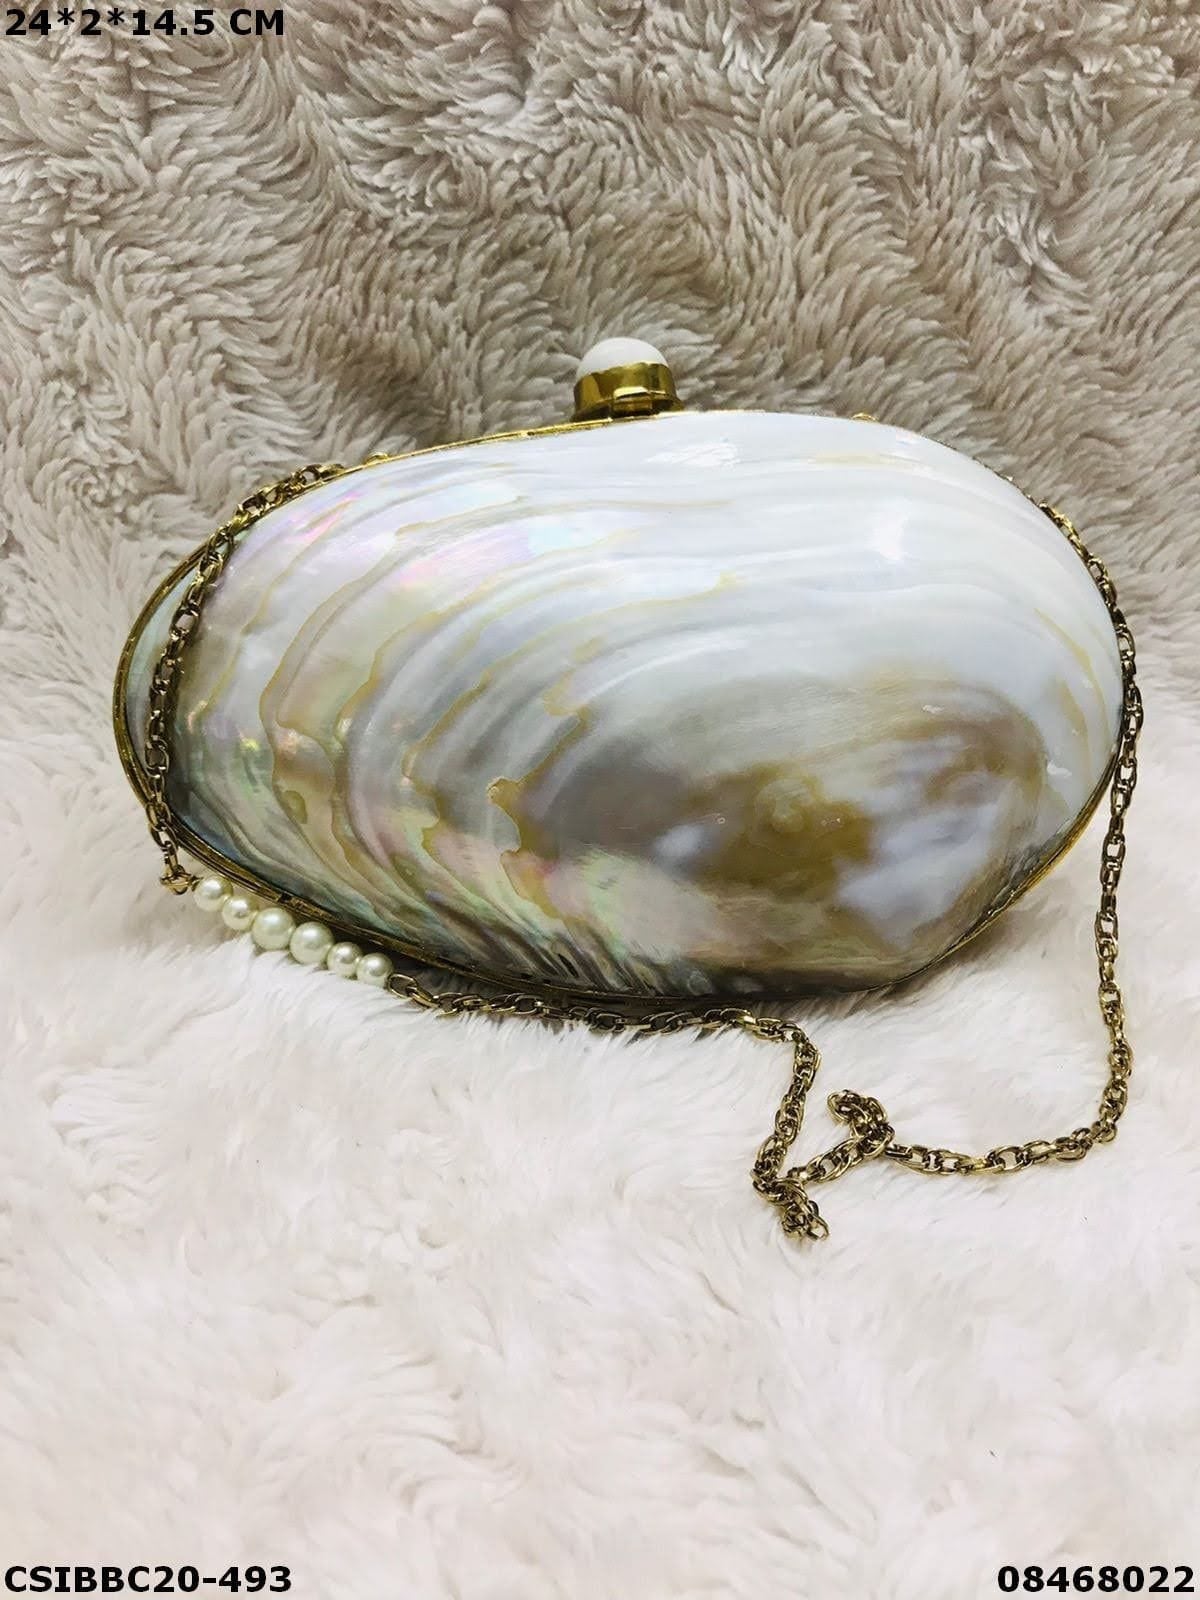 Indian Natural Handcrafted Sea Shell Clutch Bag, Clam Shell